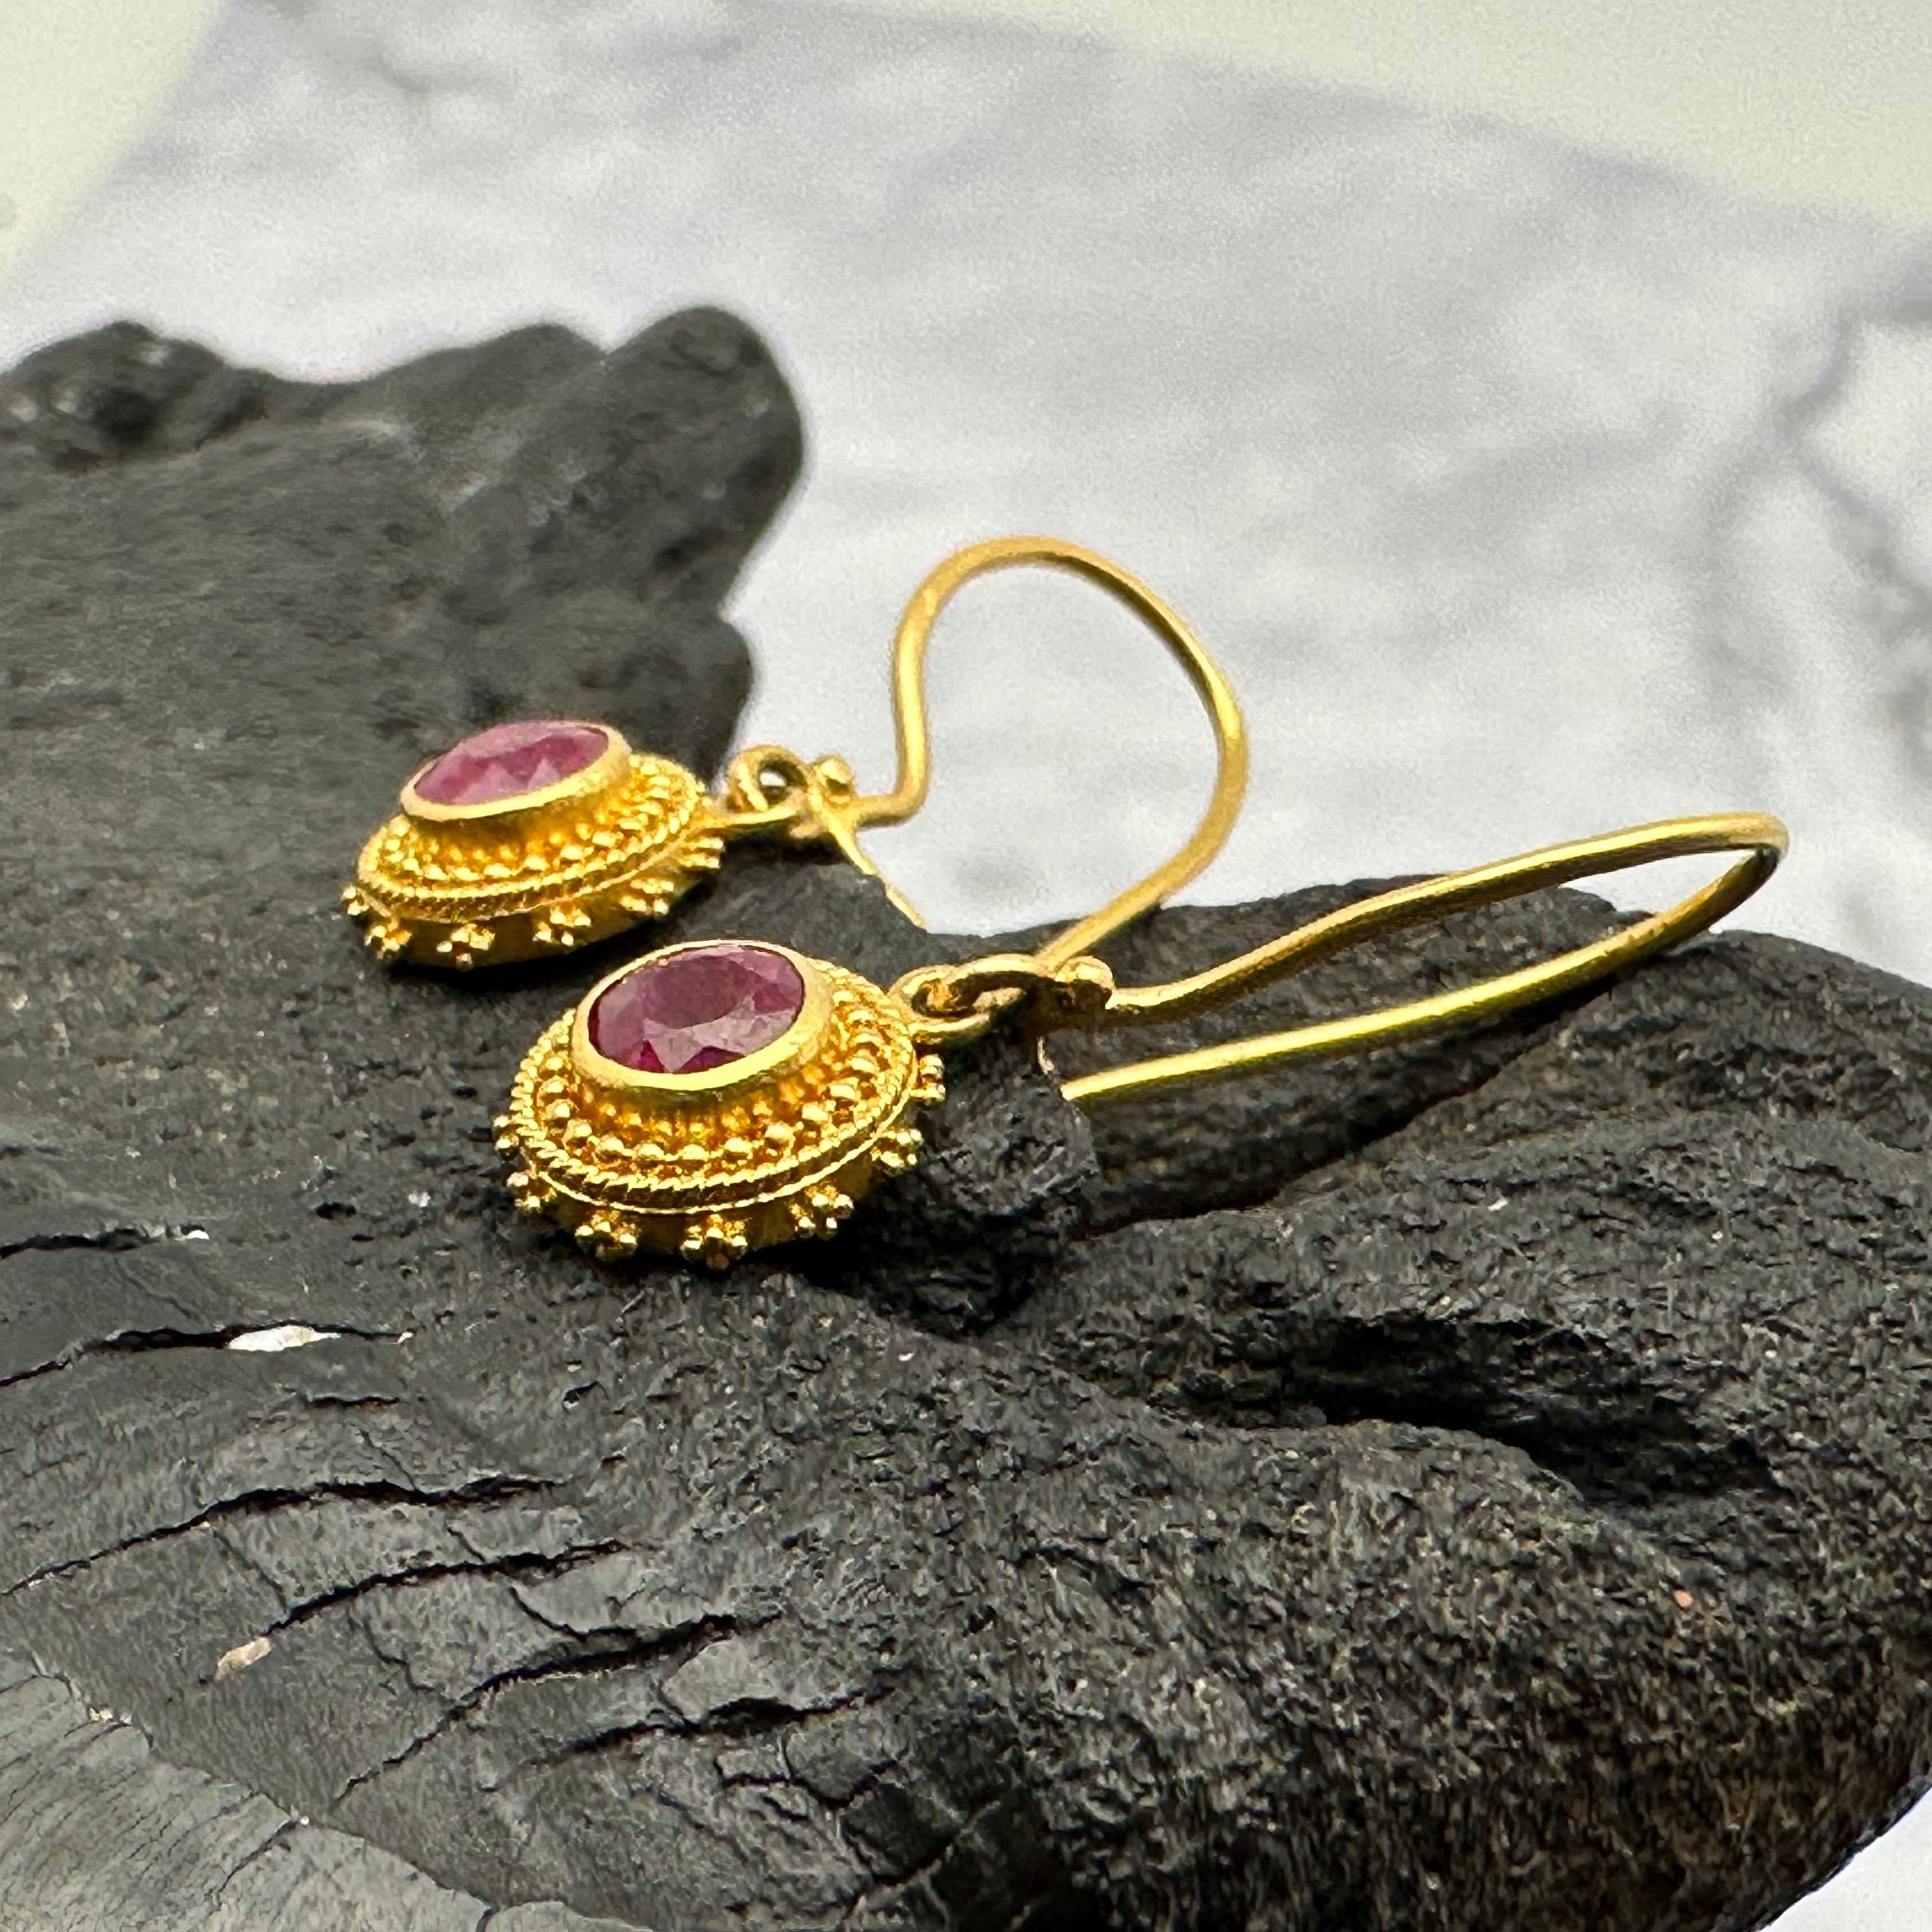 Two 4 mm round faceted rubies are set in a cylindrical radiating granulated high Karat setting in this exquisite example of artisanal gold-smithing art.  Beautiful color to dangle below safety clasp wires.  Nice!
